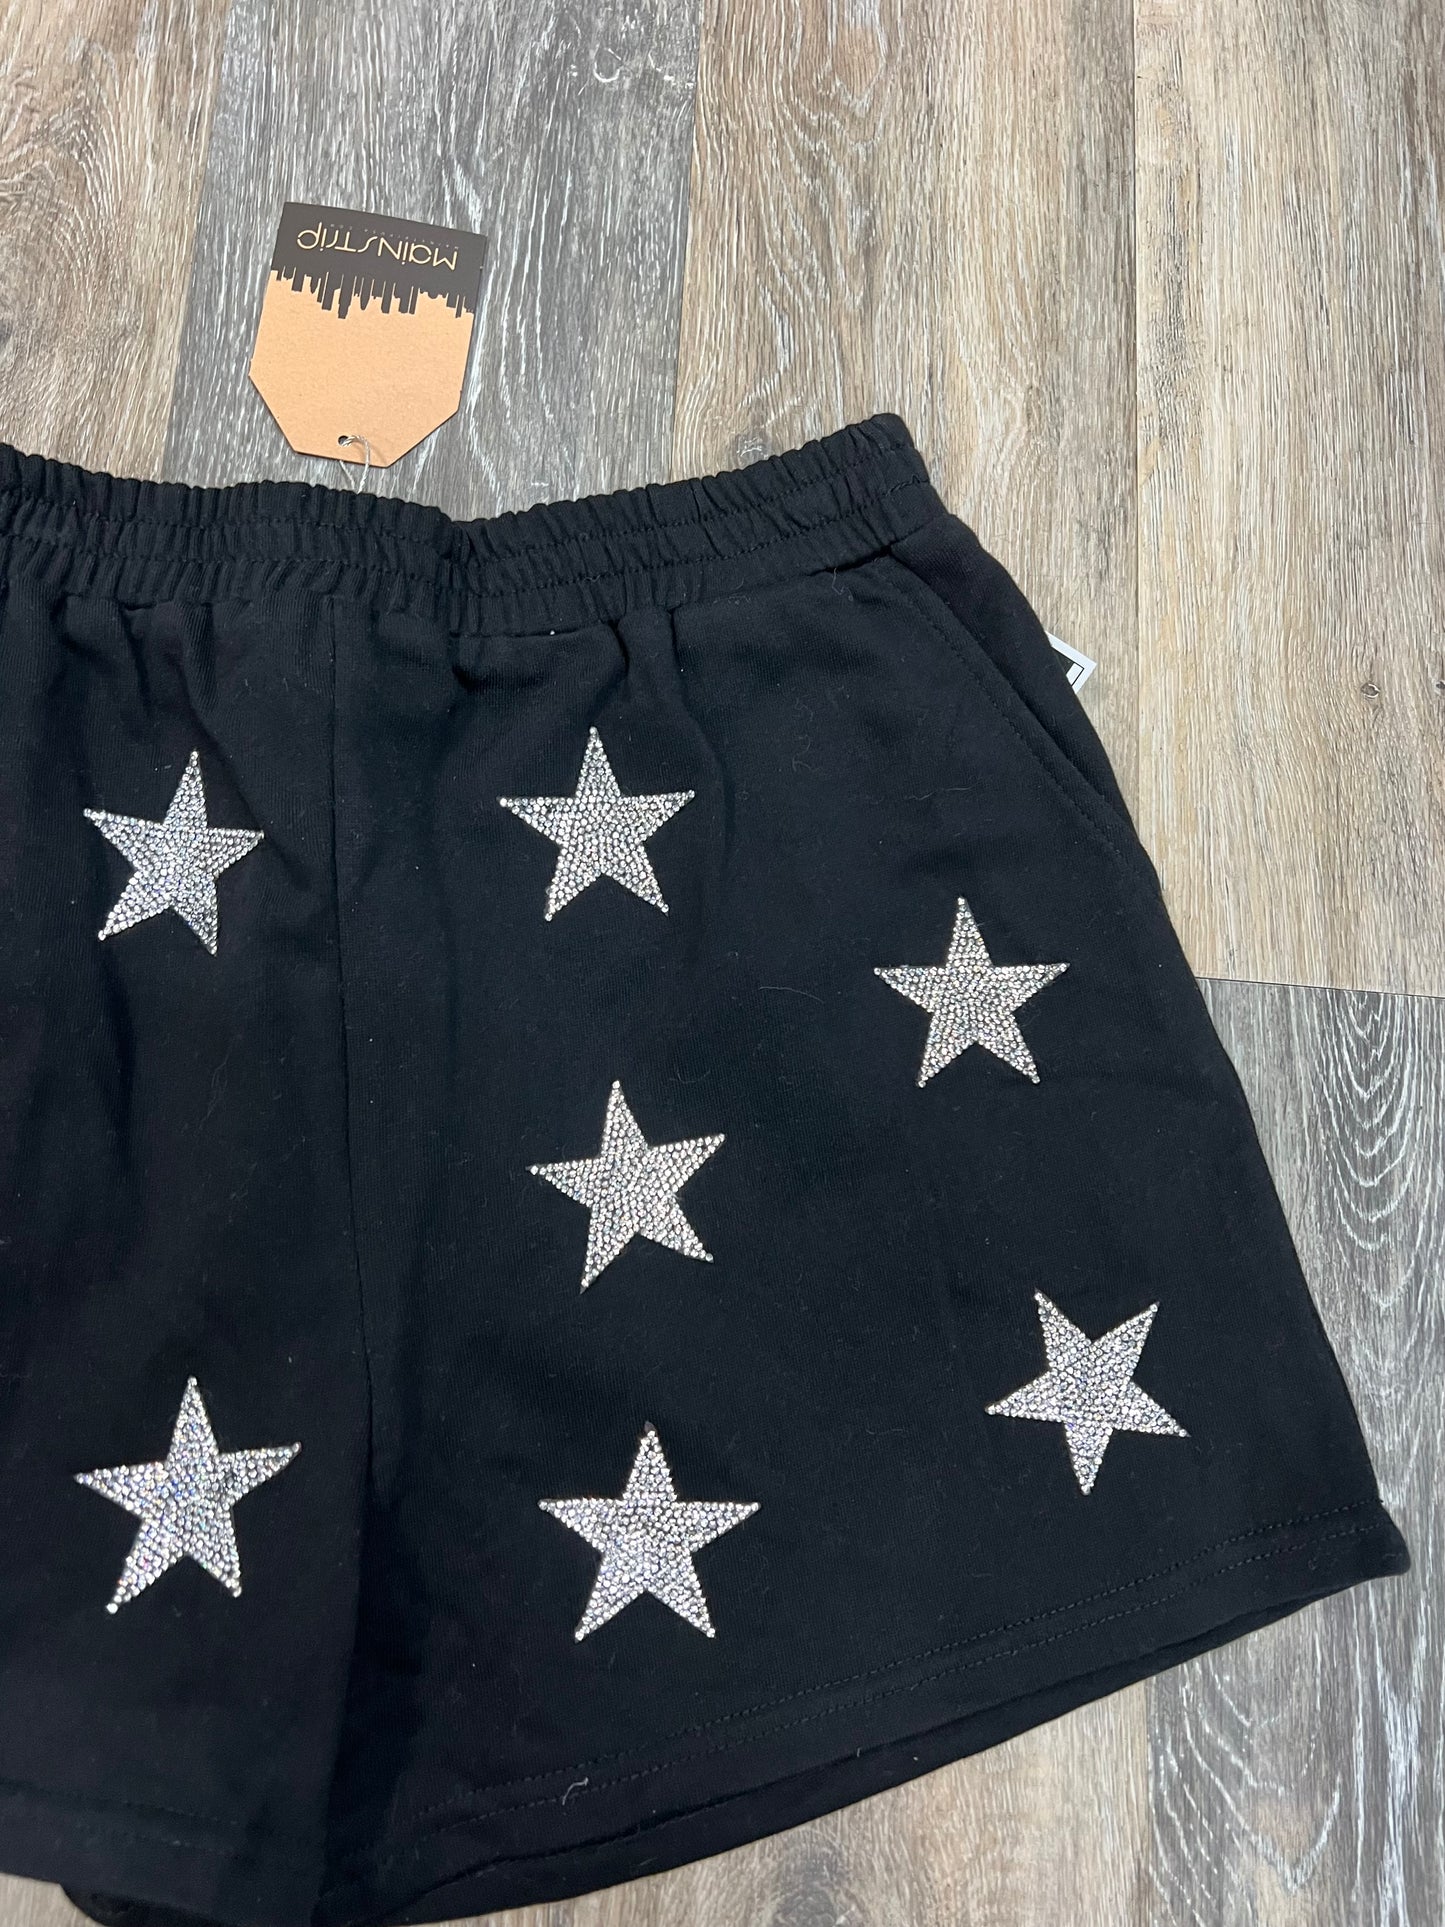 Shorts By Main Strip  Size: M